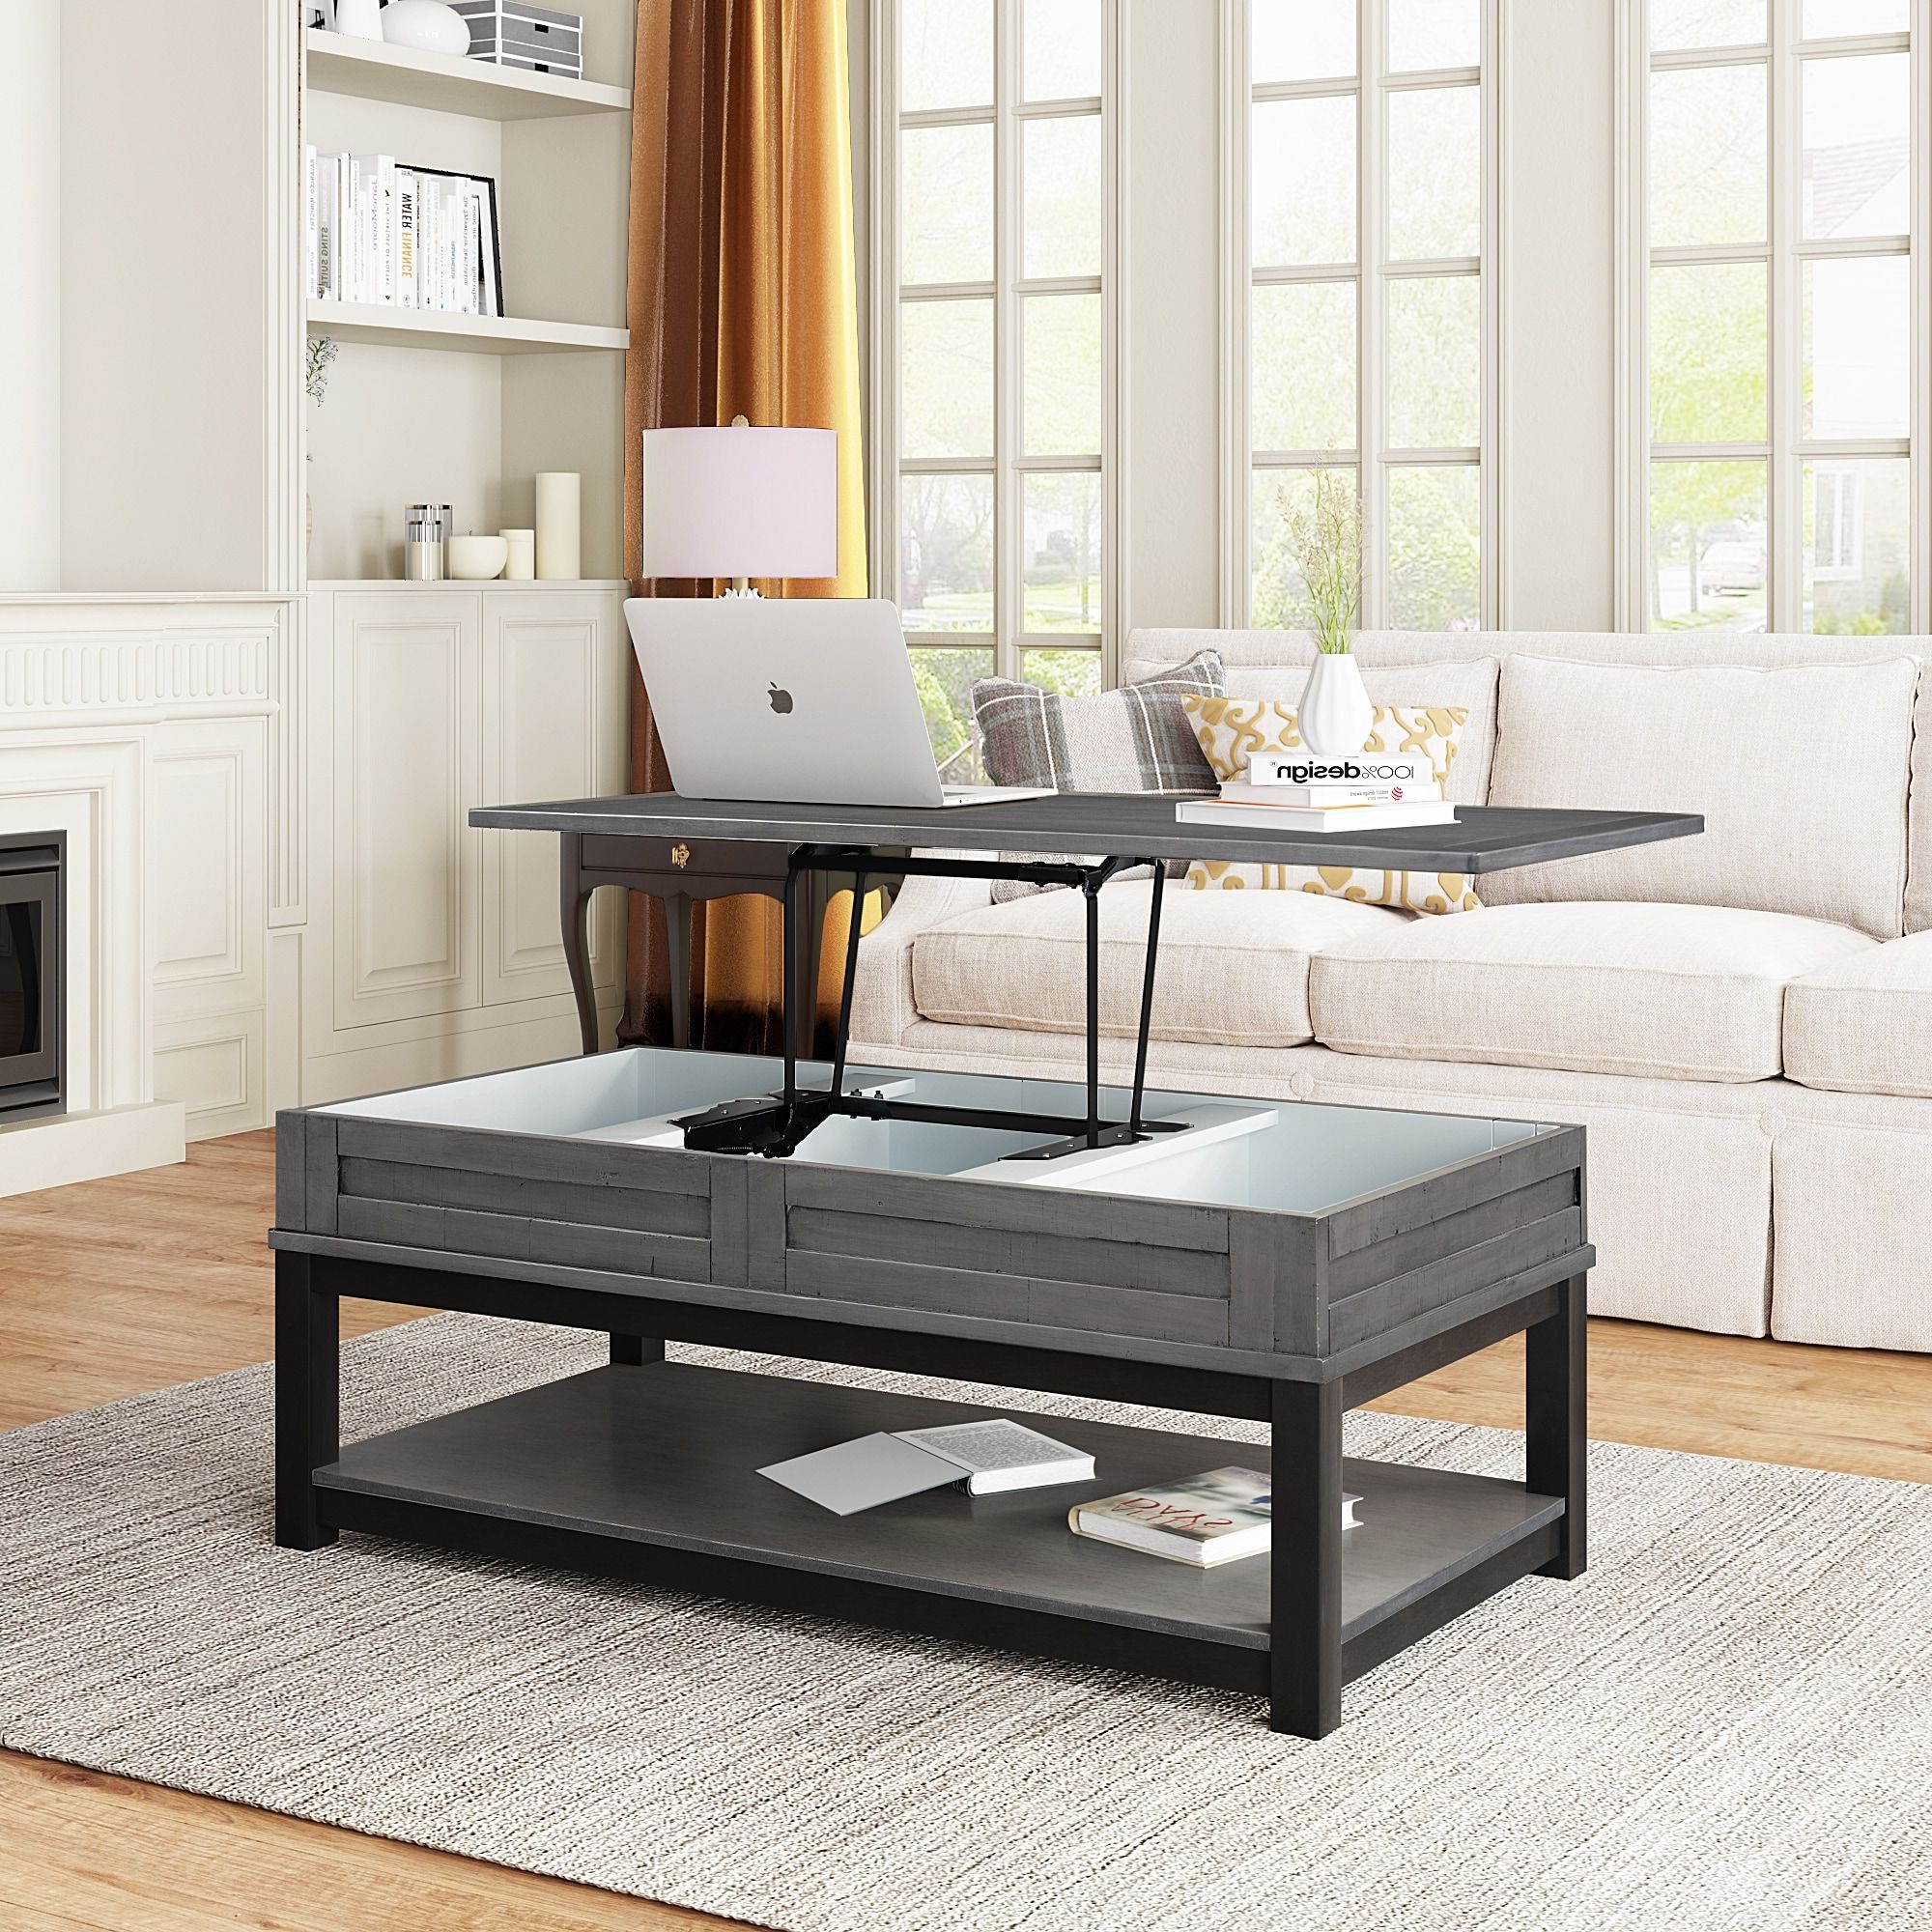 Fashionable Lift Top Coffee Table With Inner Storage Space & Shelf, Modern Simple  Exquisite End Tables For Living Room, Bedroom – Bed Bath & Beyond – 37277080 With Lift Top Coffee Tables With Storage (View 8 of 10)